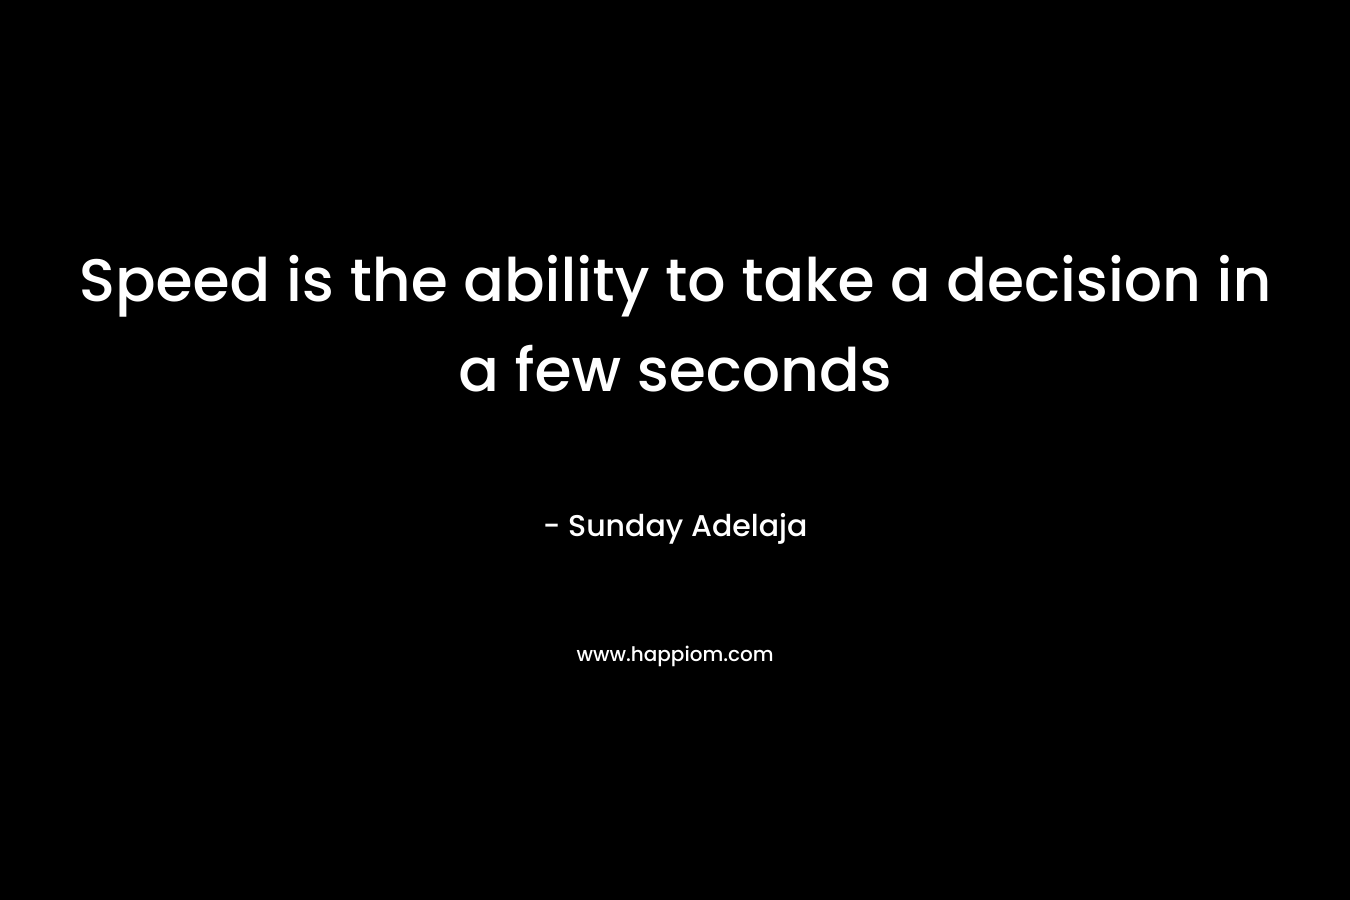 Speed is the ability to take a decision in a few seconds